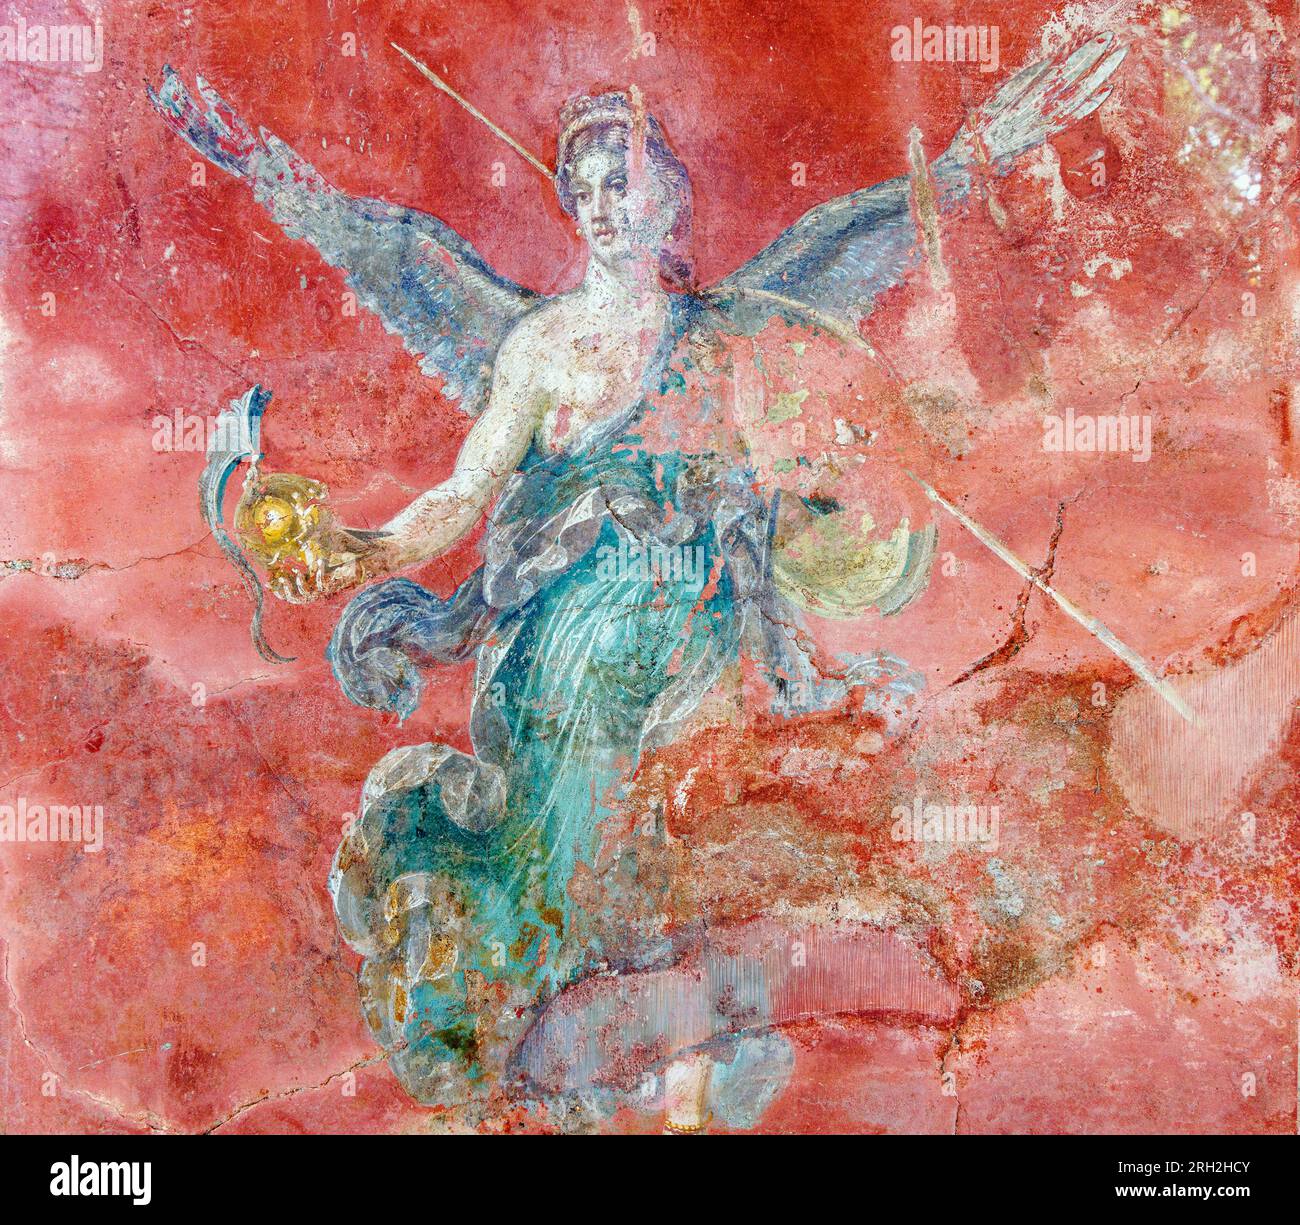 Pompeii Archaeological Site, Campania, Italy.  Winged Victory fresco on display in the Large Palaestra, or Palestra Grande.  Pompeii, Herculaneum, and Stock Photo